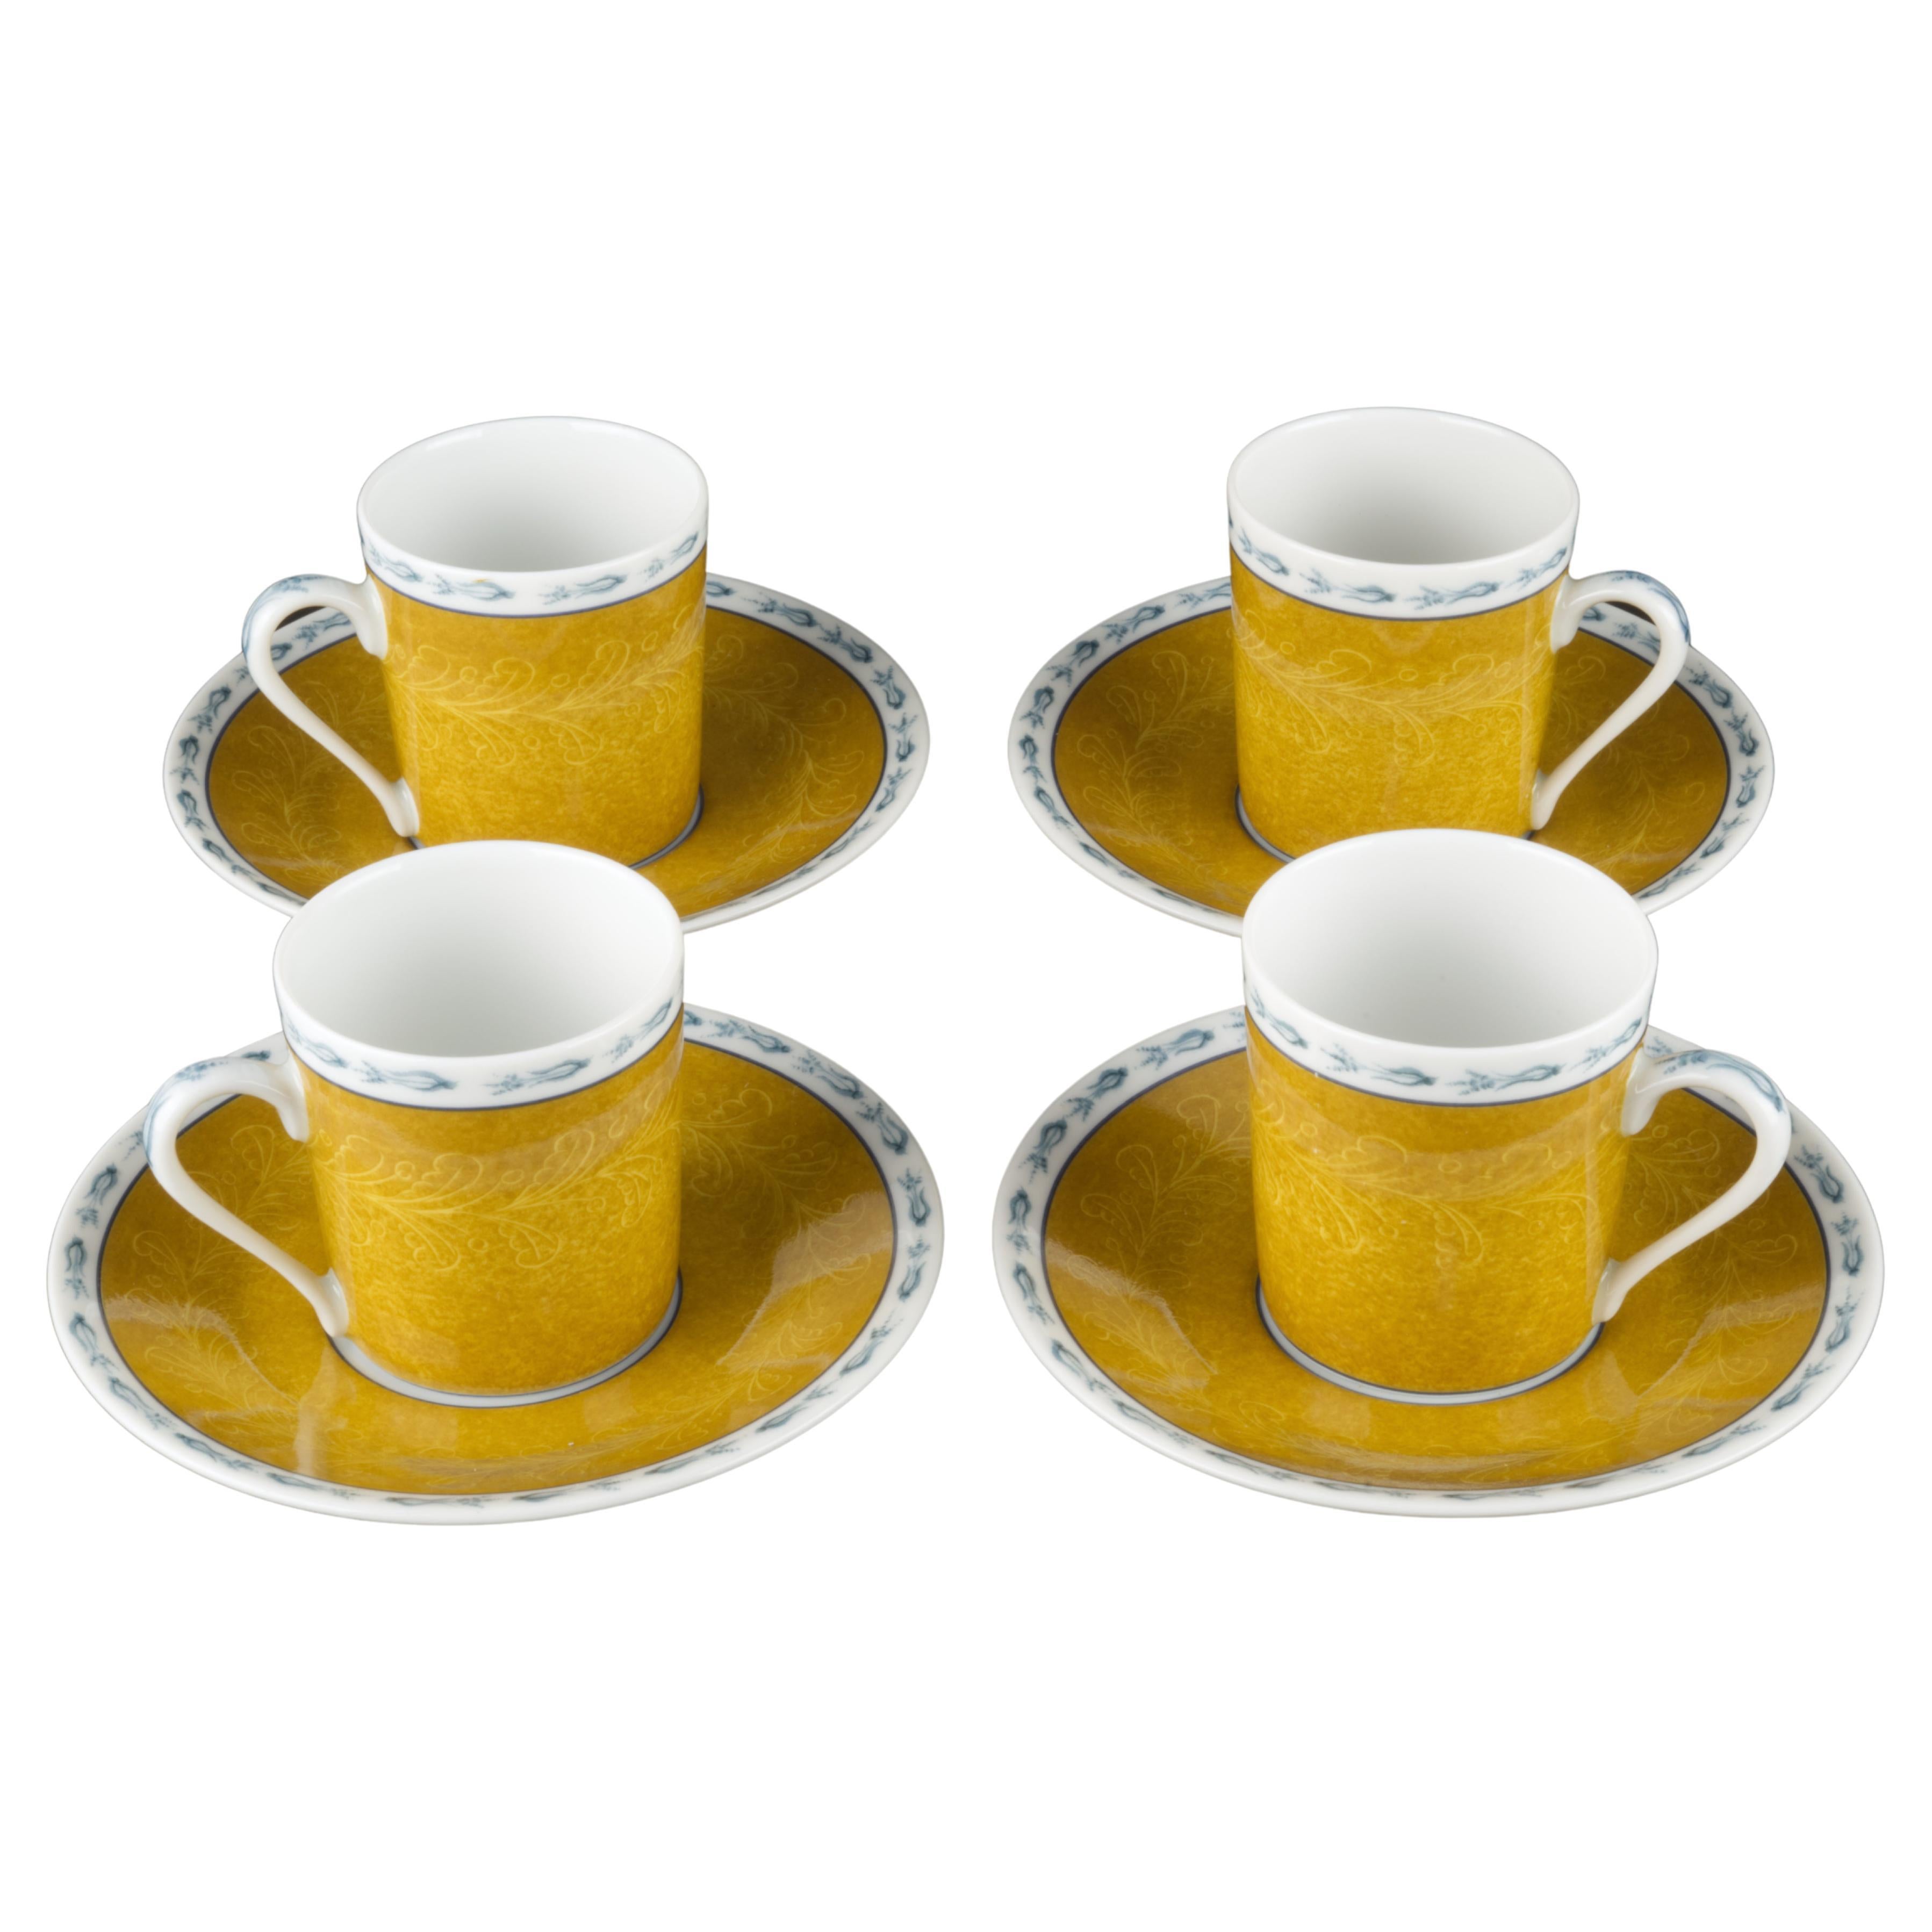 Basse Cour by Pierre Frey set of 4 Demitasse Cups and Saucers, Limoges Porcelain For Sale